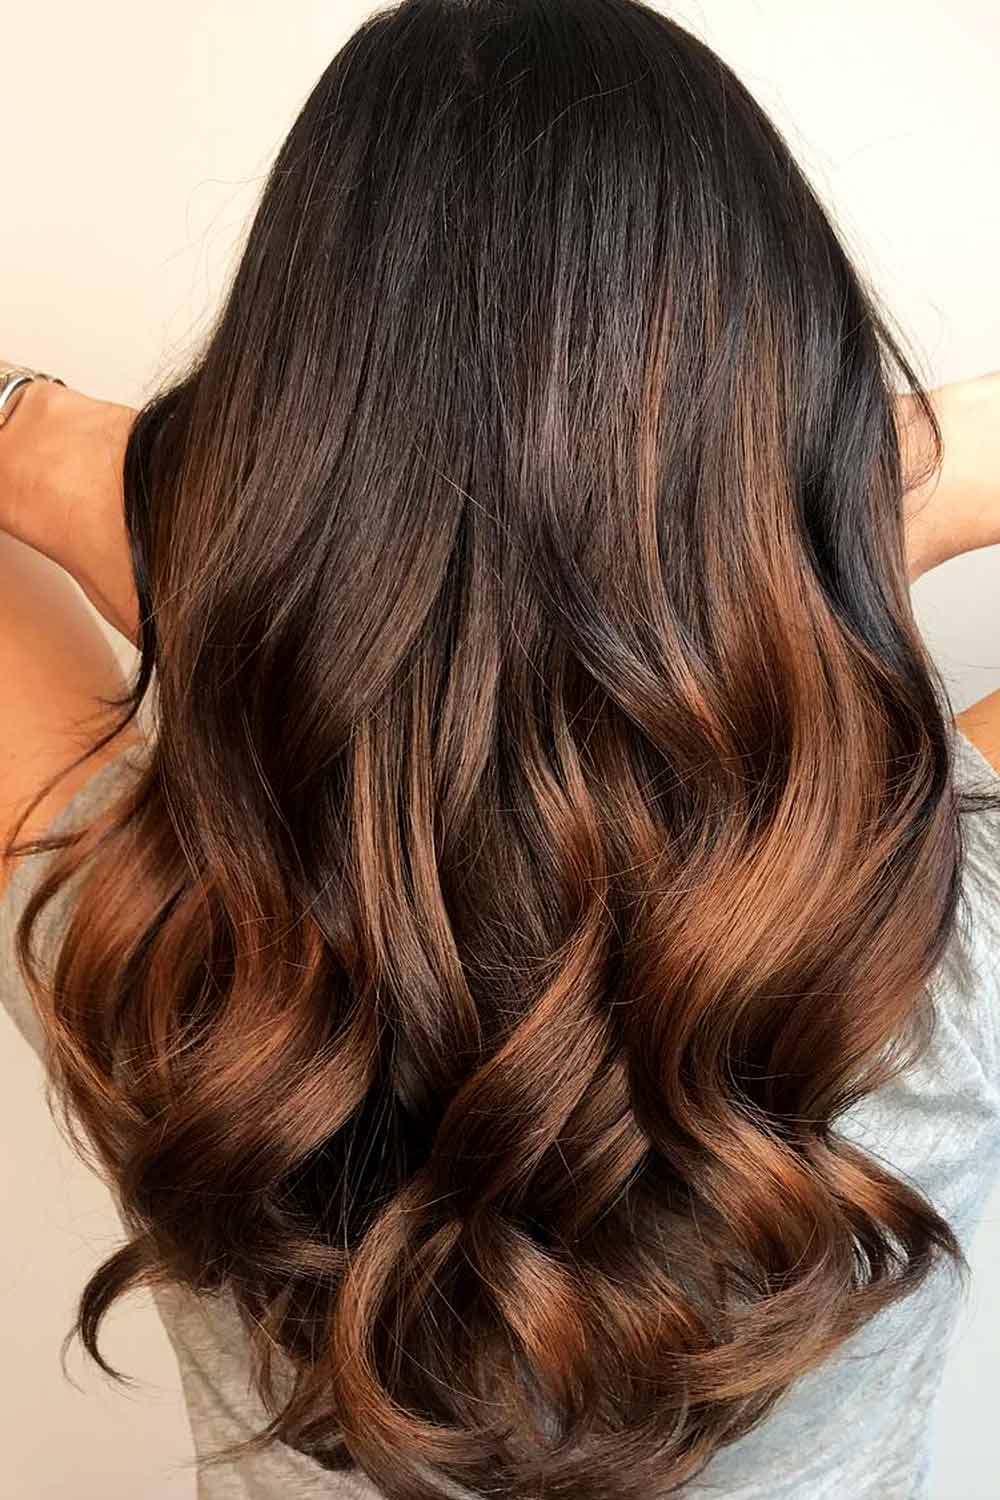 How to Choose Black Hair Color That's a Perfect Fit - Deseo Salon & BlowDry